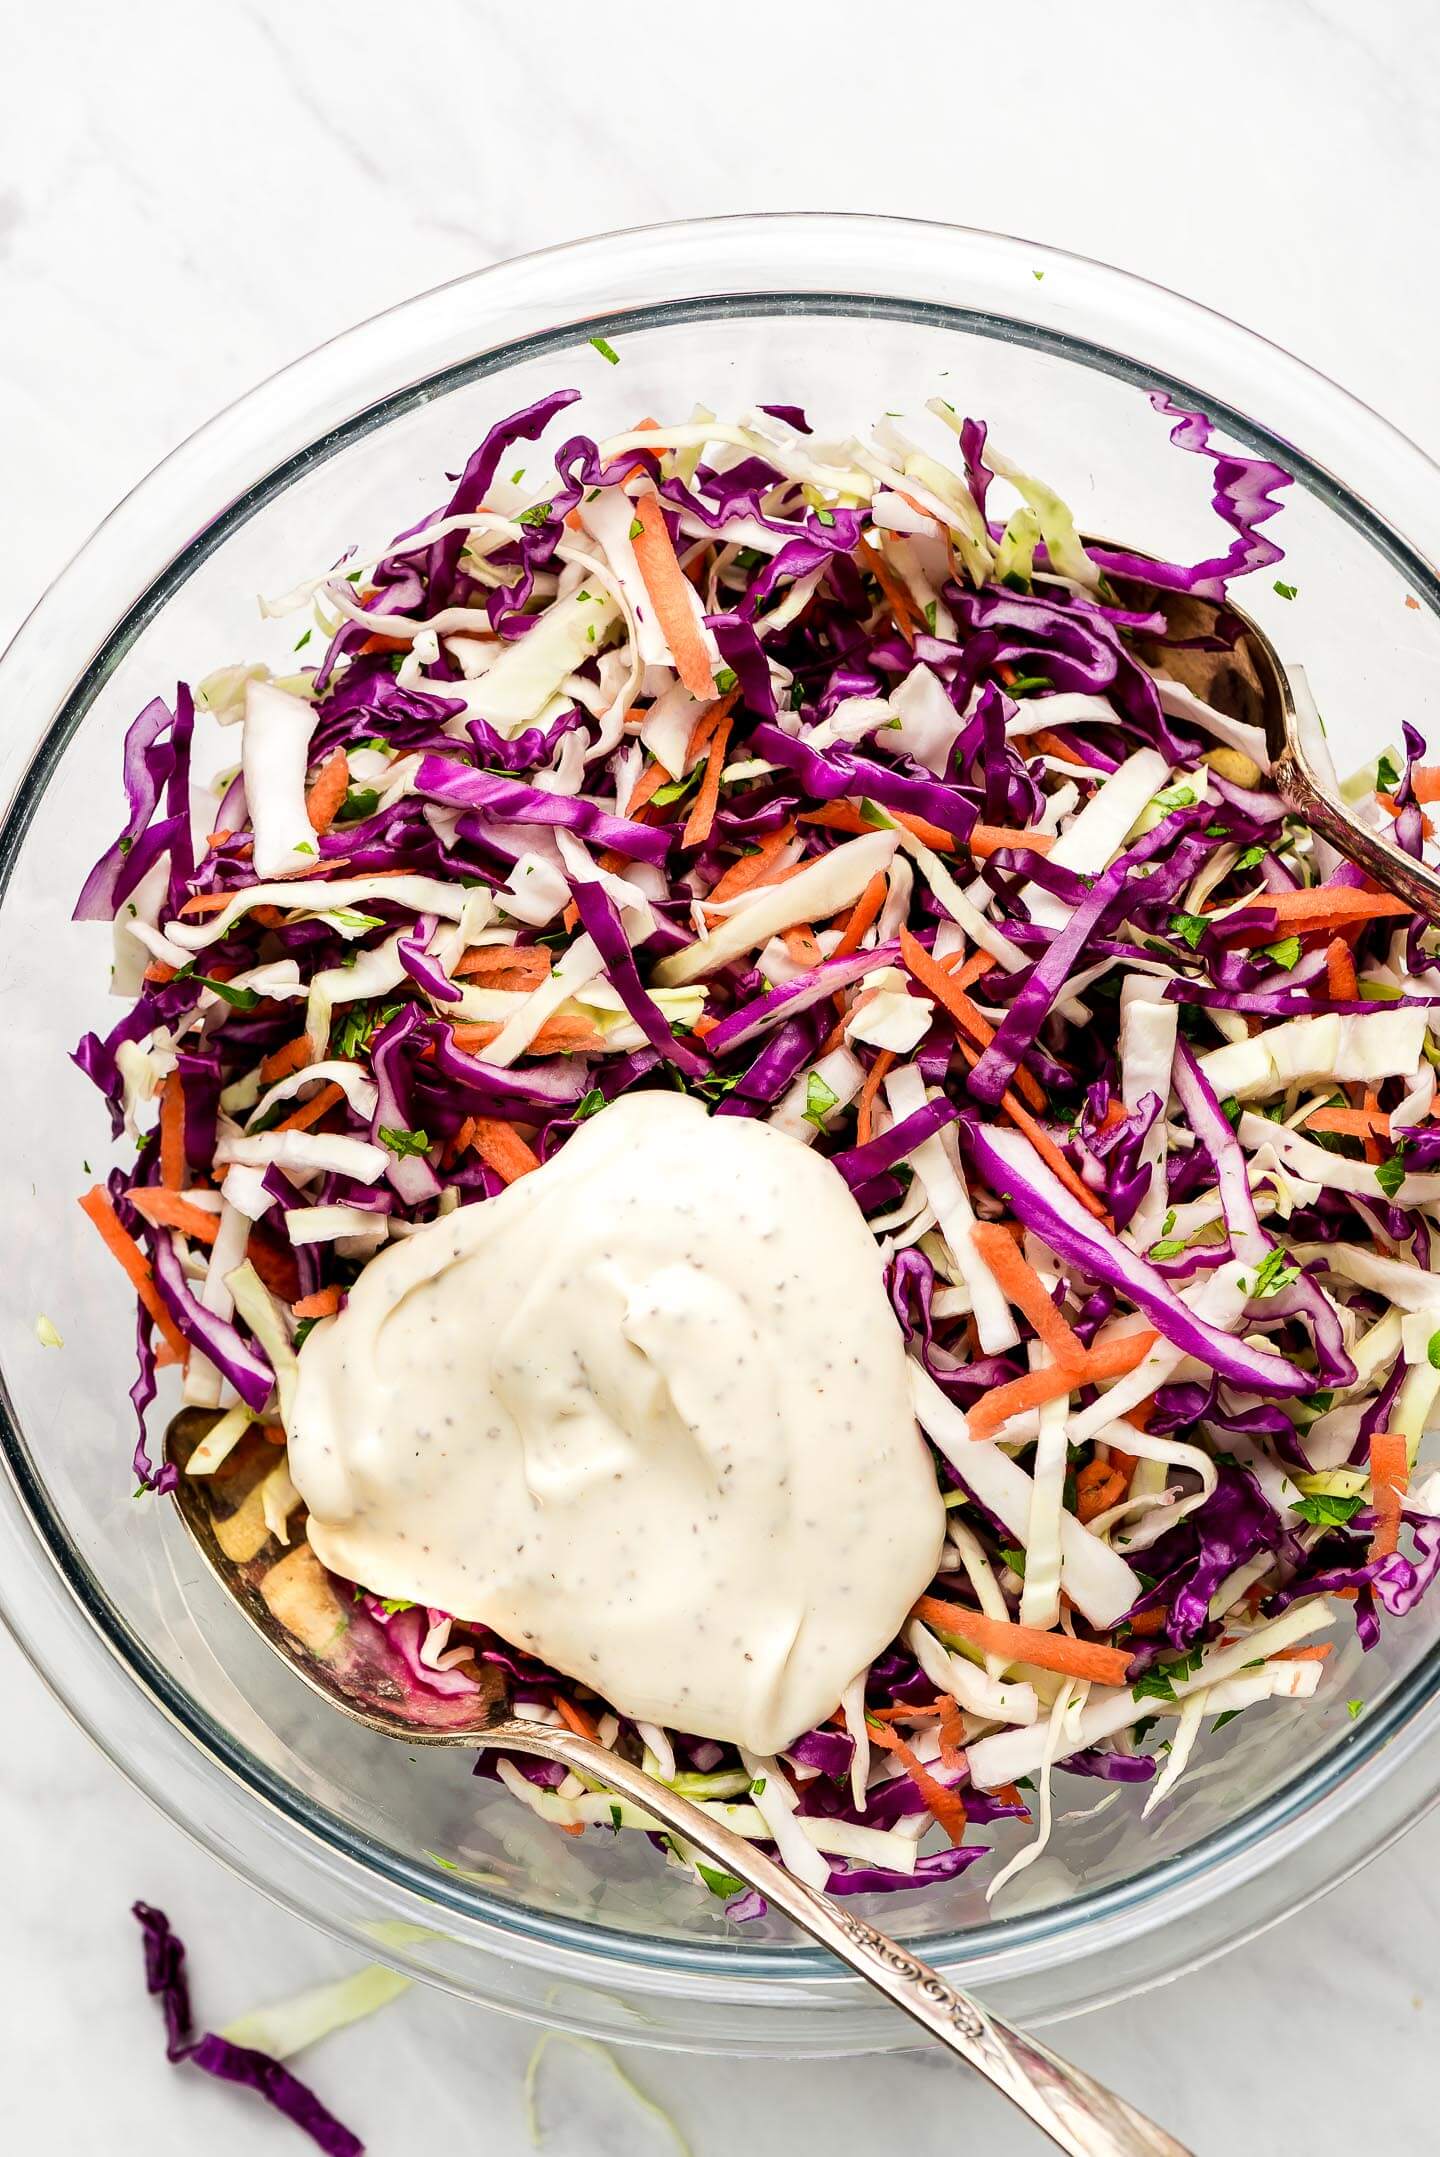 A bowl of shredded cabbage and carrots with a glob of dressing on top.